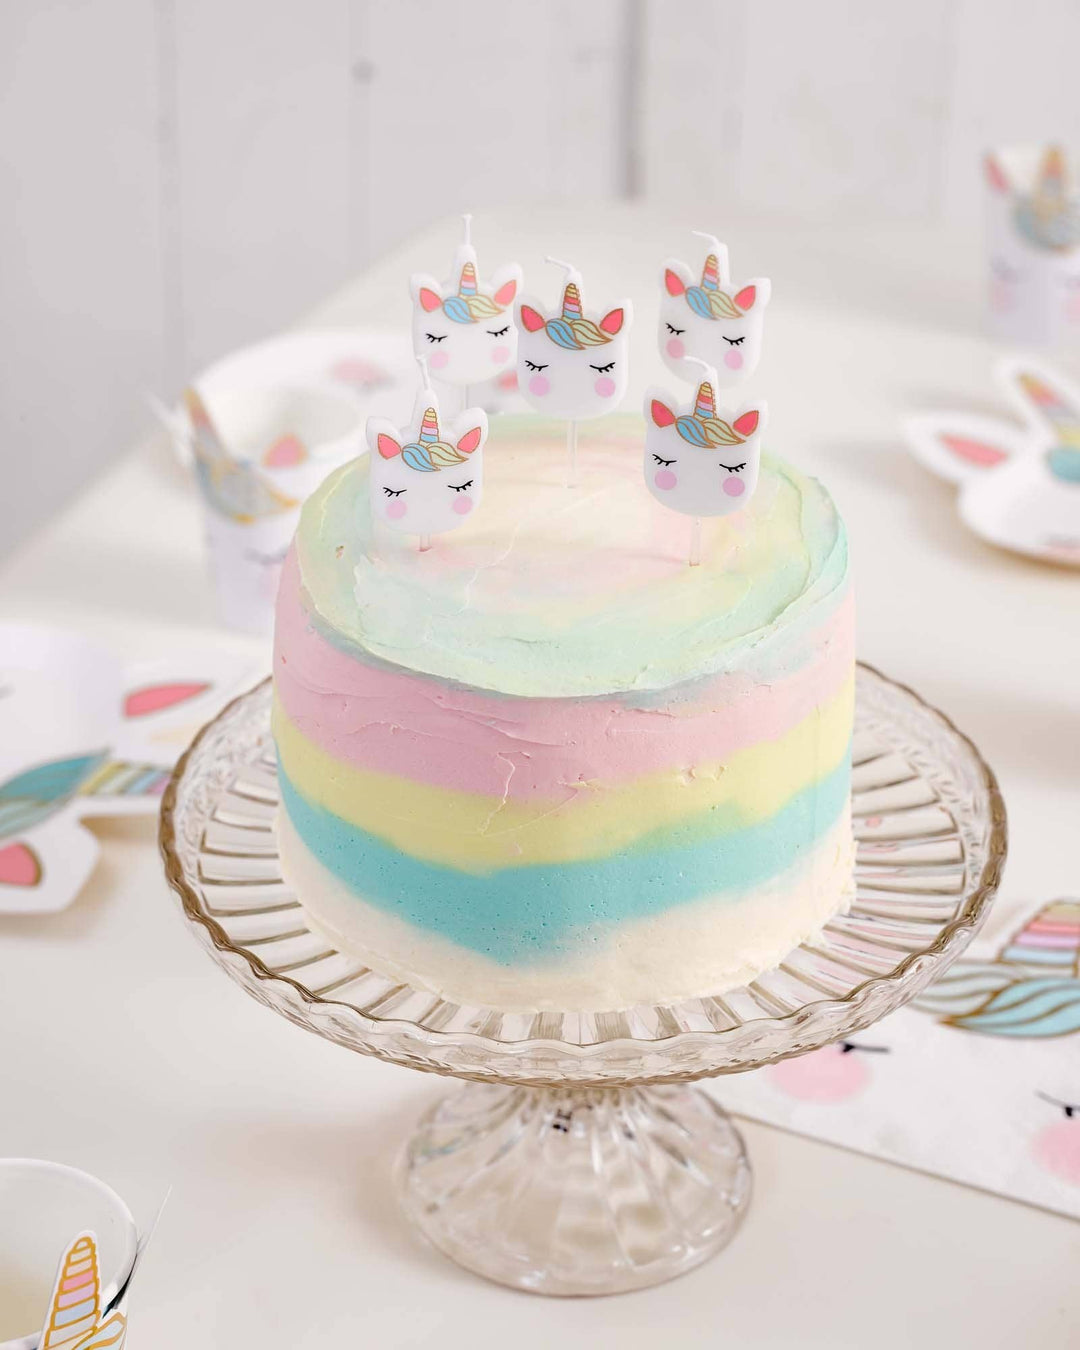 Unicorn Face Cake Candles - 5 Pack